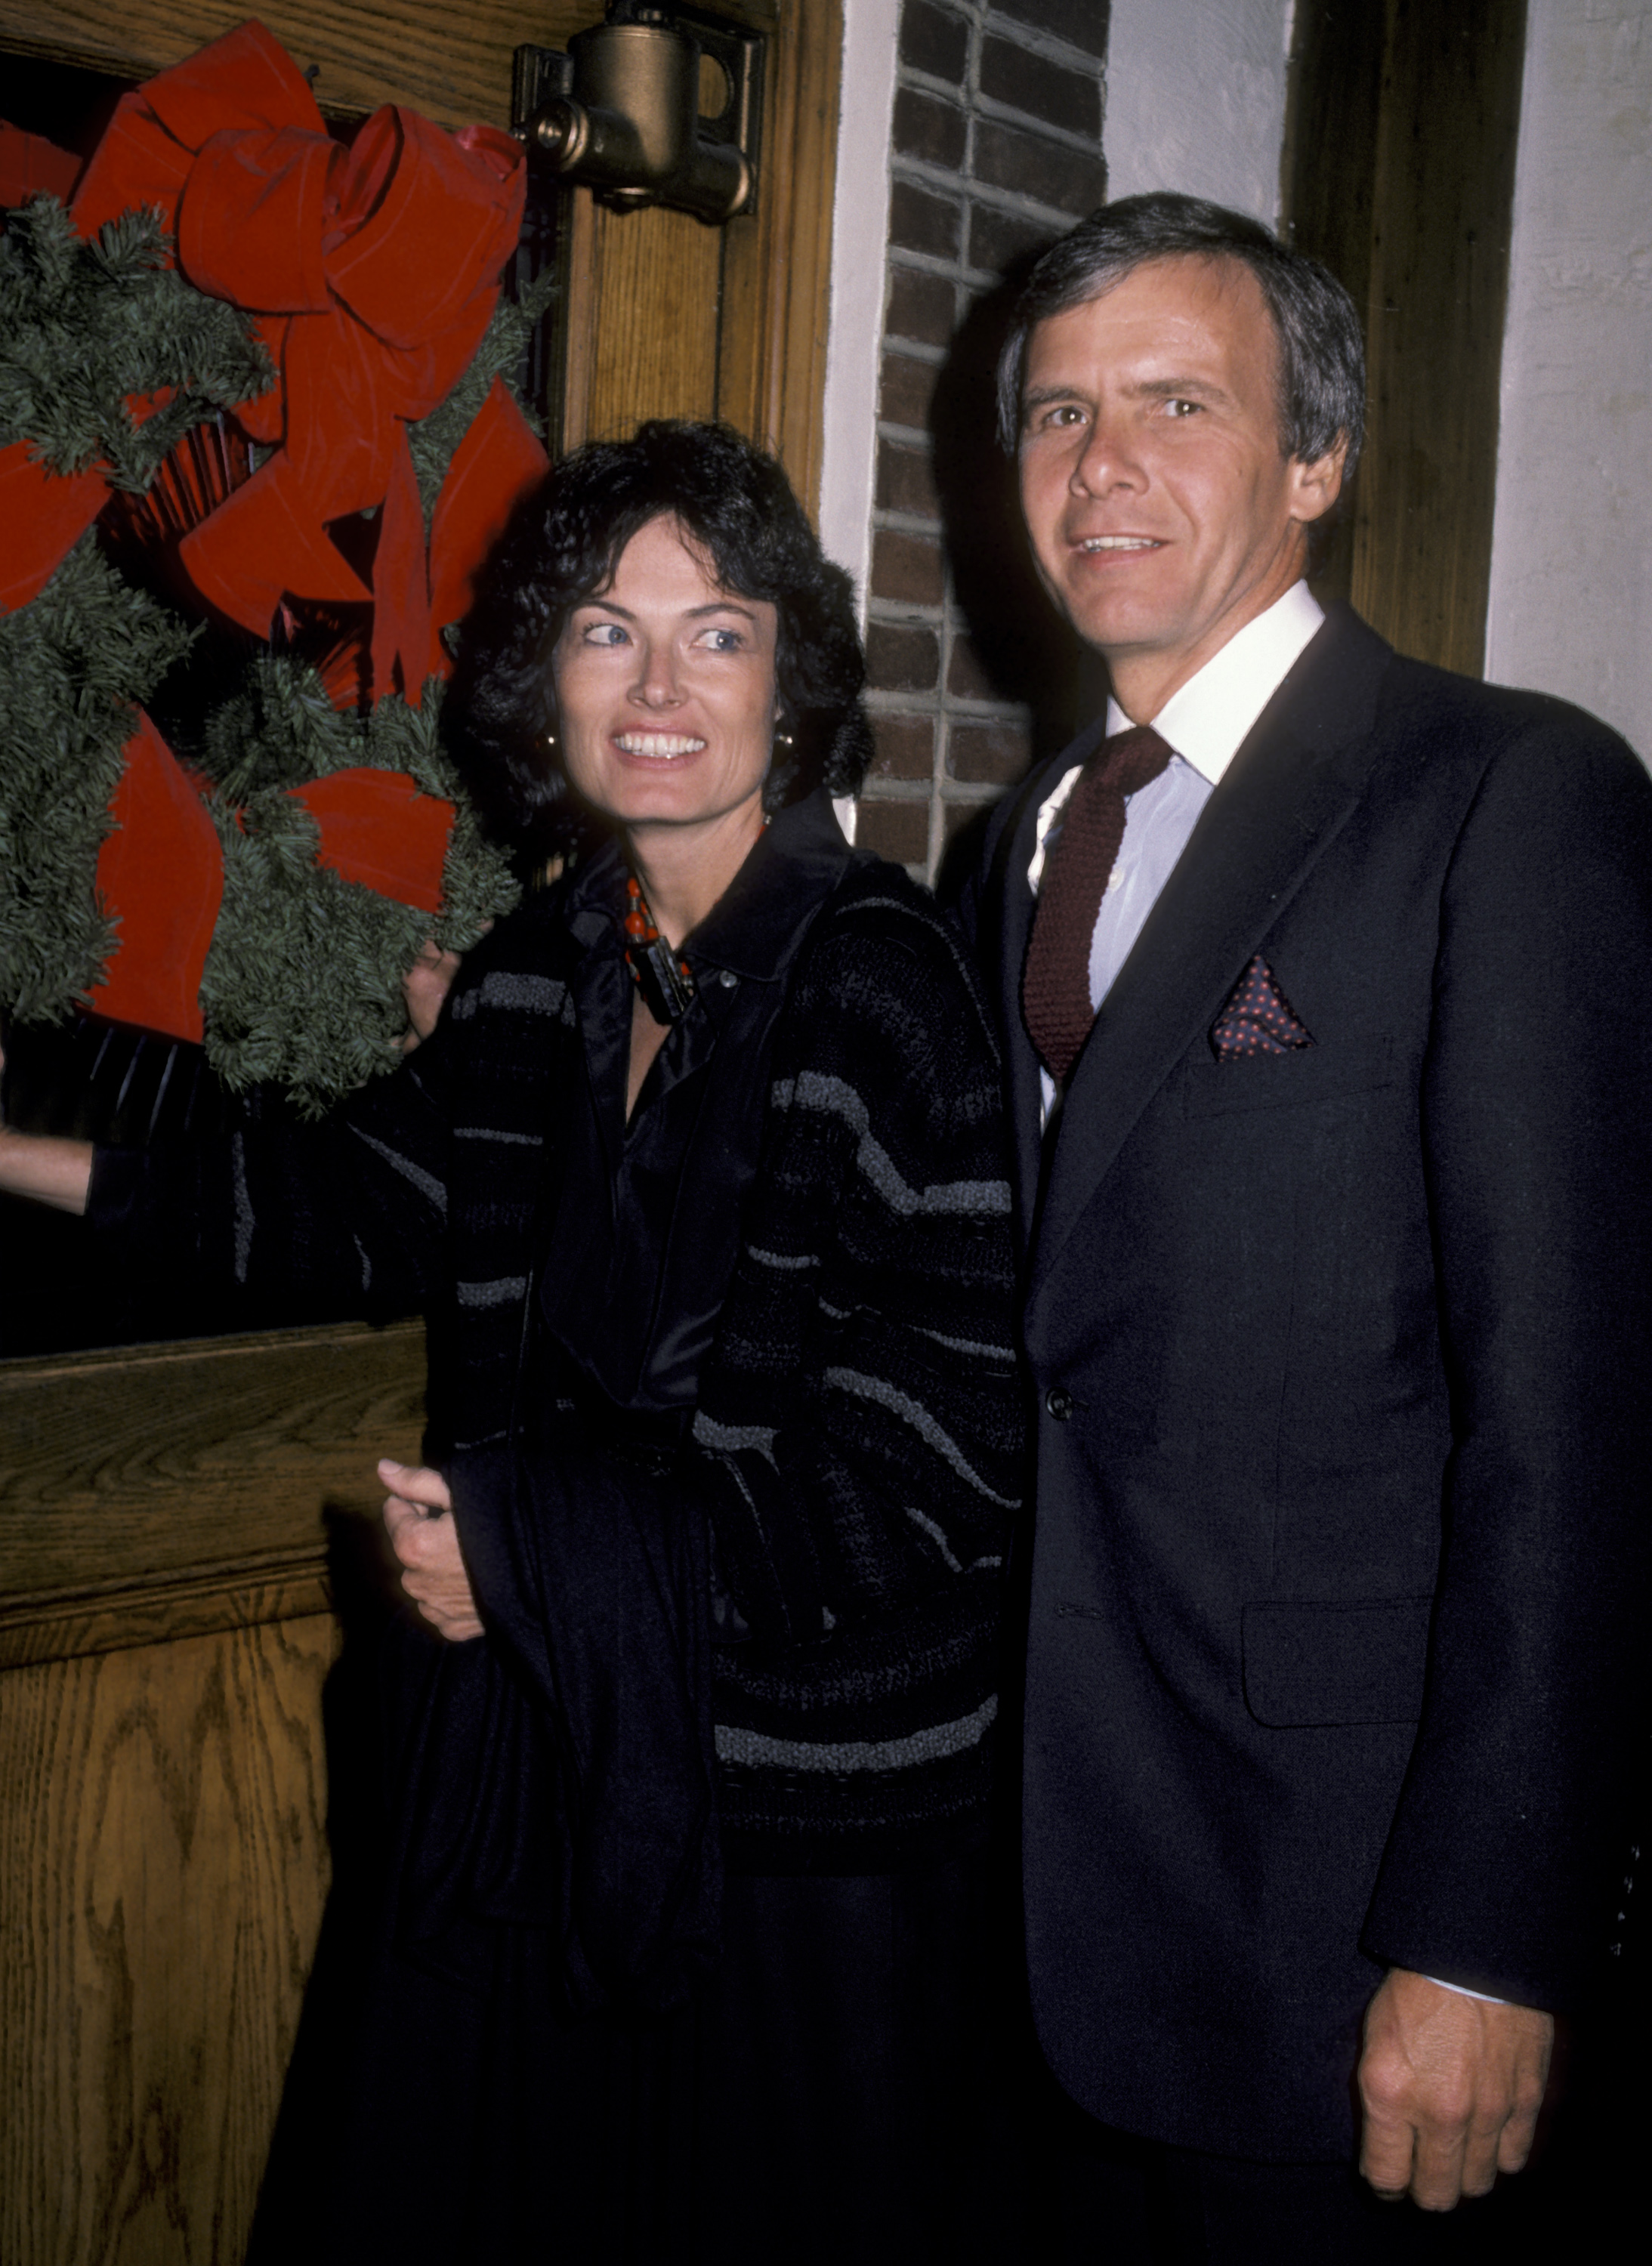 Meredith Auld and Tom Brokaw at the opening party for "The Real Thing" on January 5, 1984, in New York City | Source: Getty Images